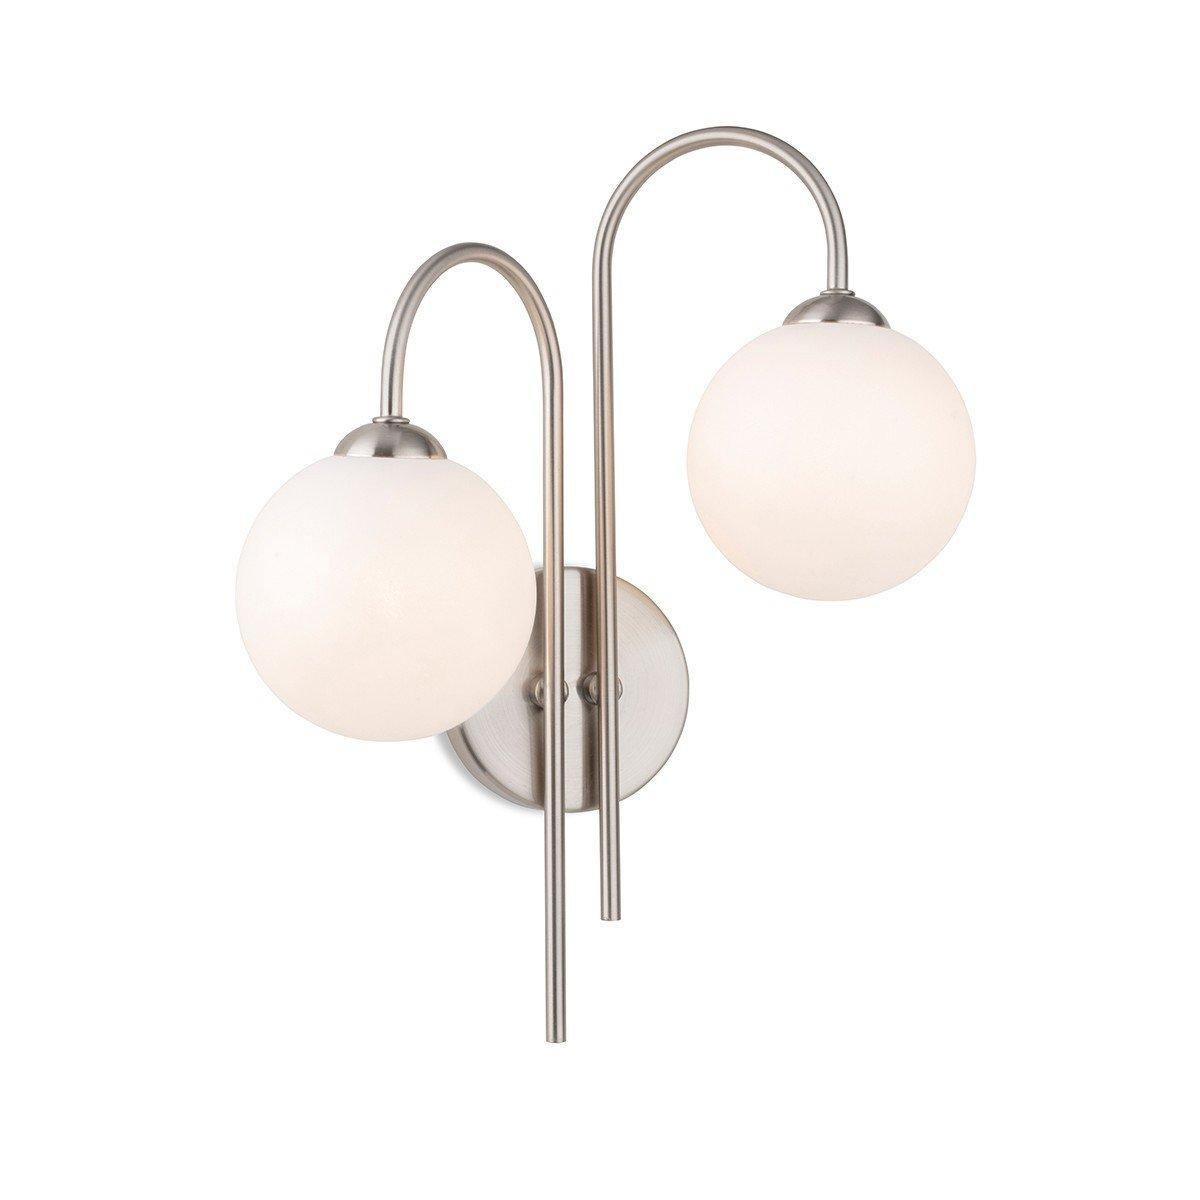 Lyndon 2 Light Globe Wall Brushed Steel with Opal White Glass